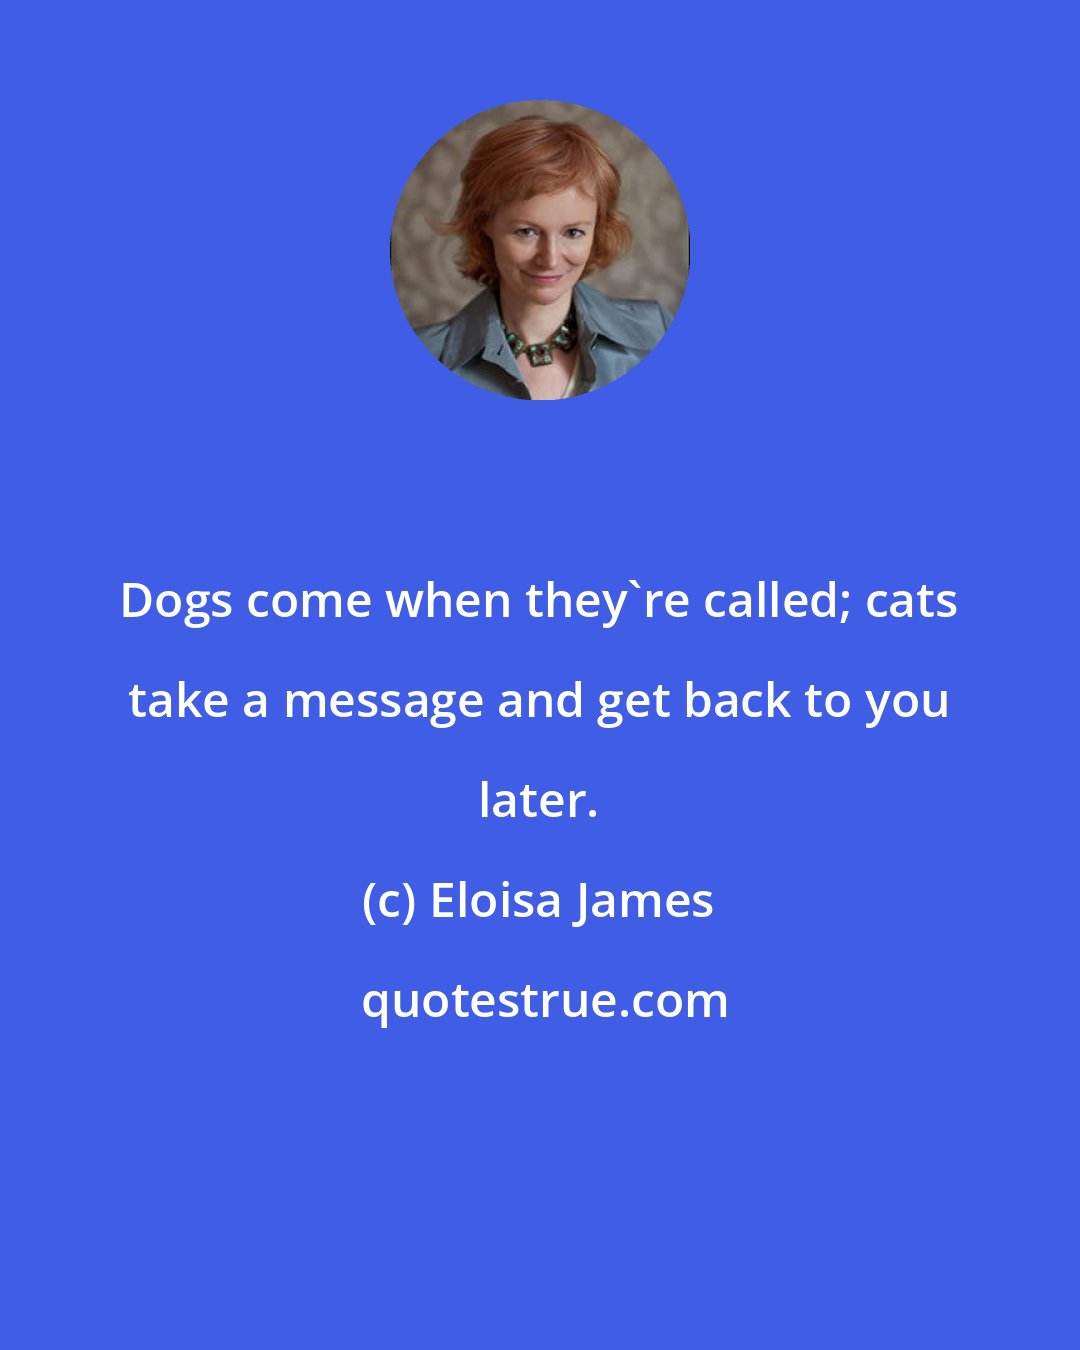 Eloisa James: Dogs come when they're called; cats take a message and get back to you later.